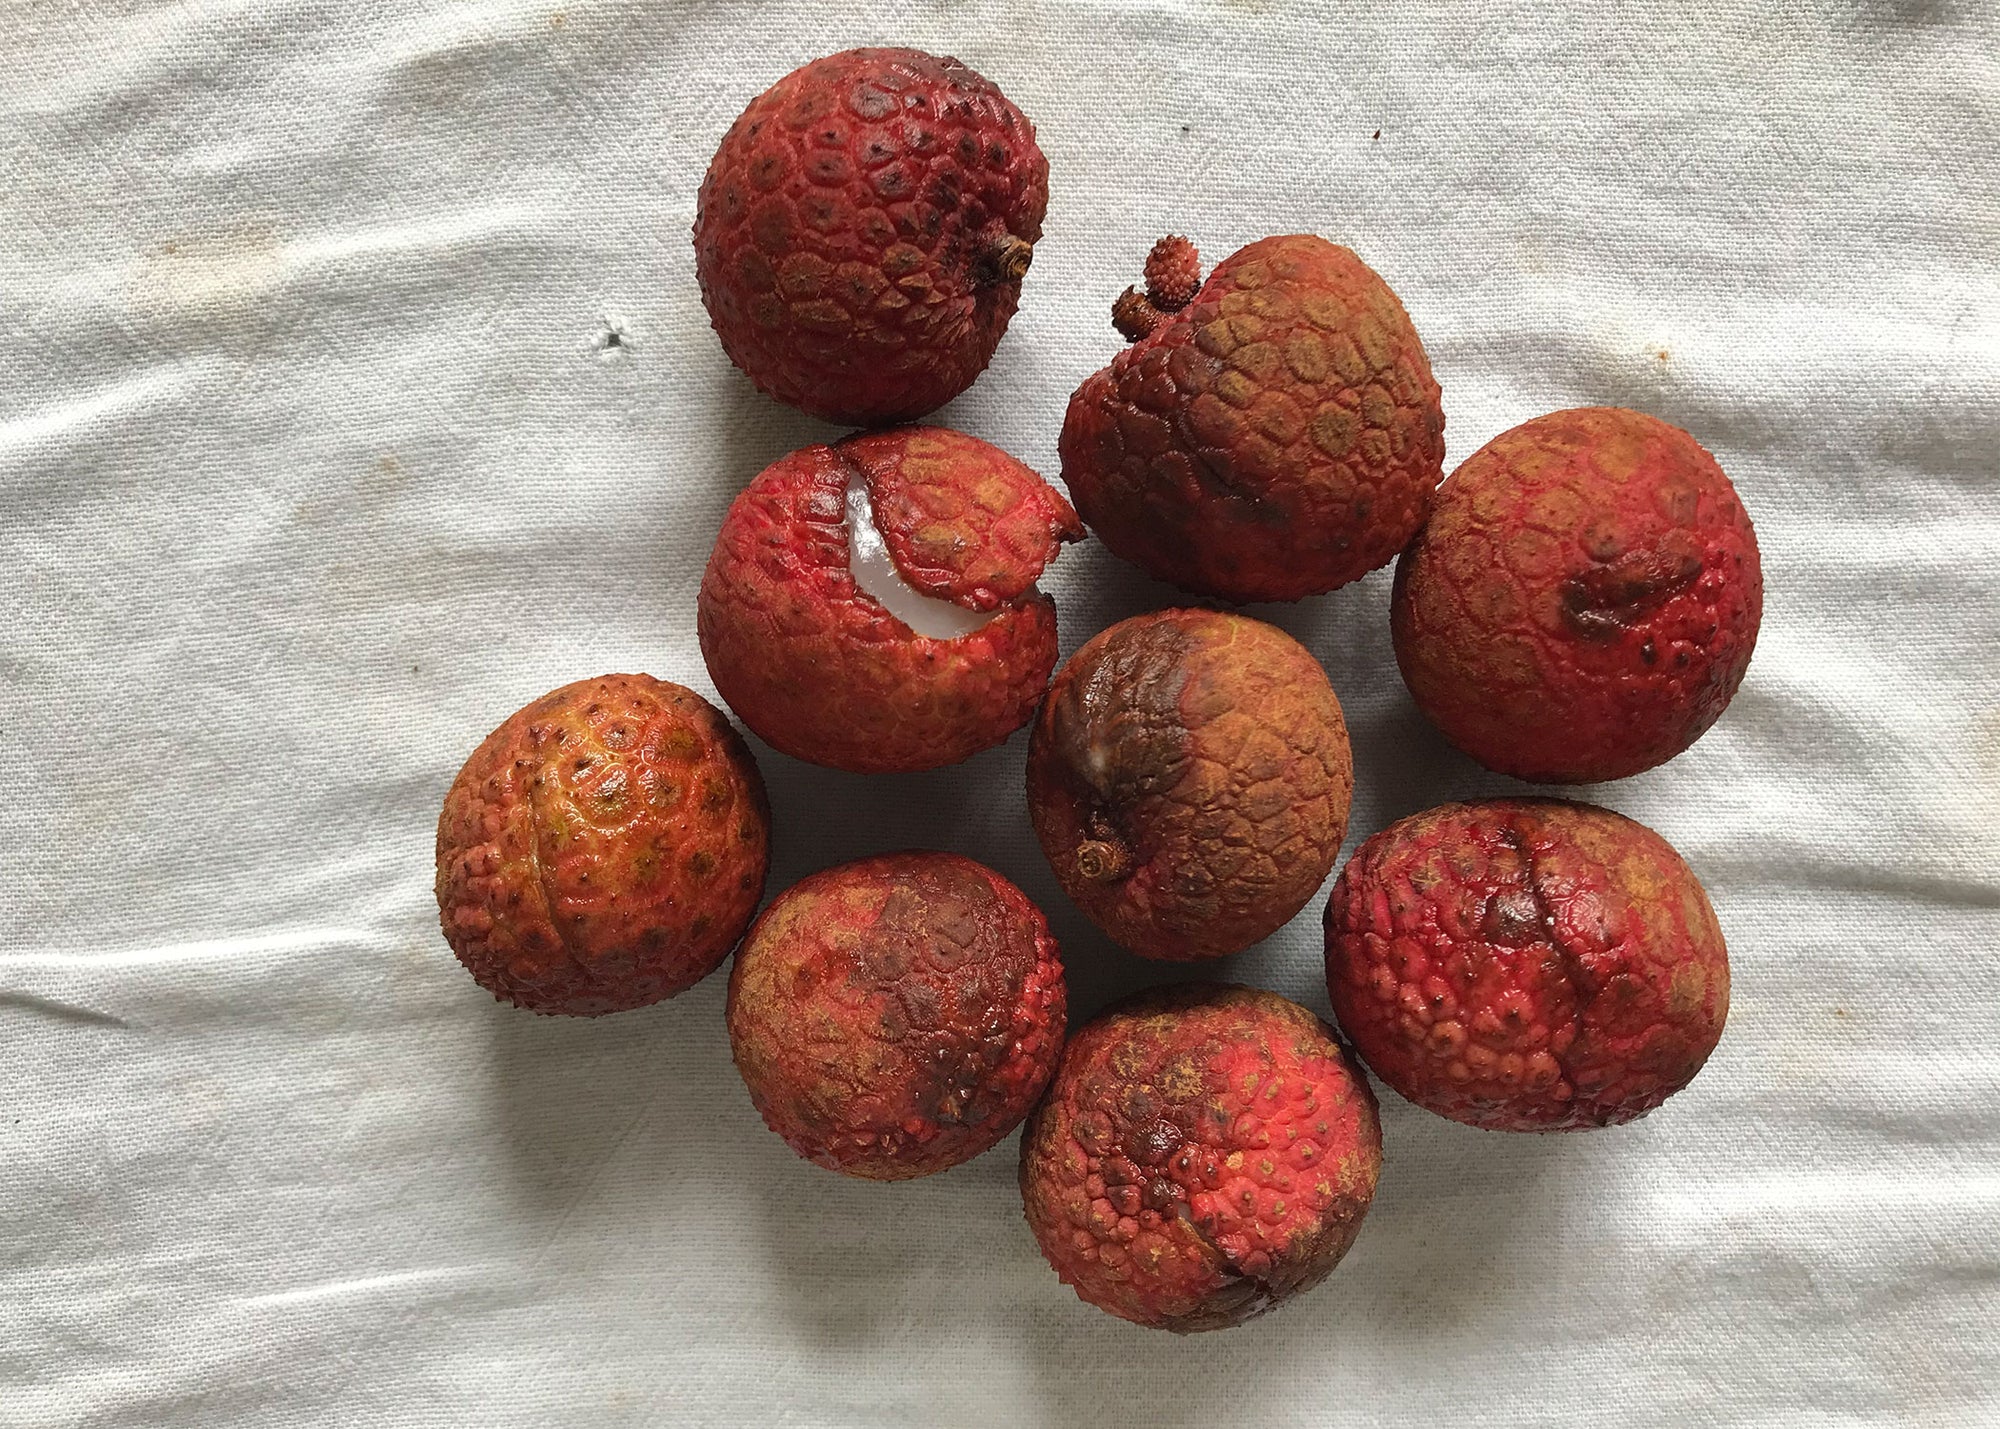 Several lychee that were bruised or split open during shipping. Image illustrated that it is expected to have a few fruits slightly damaged during shipping.